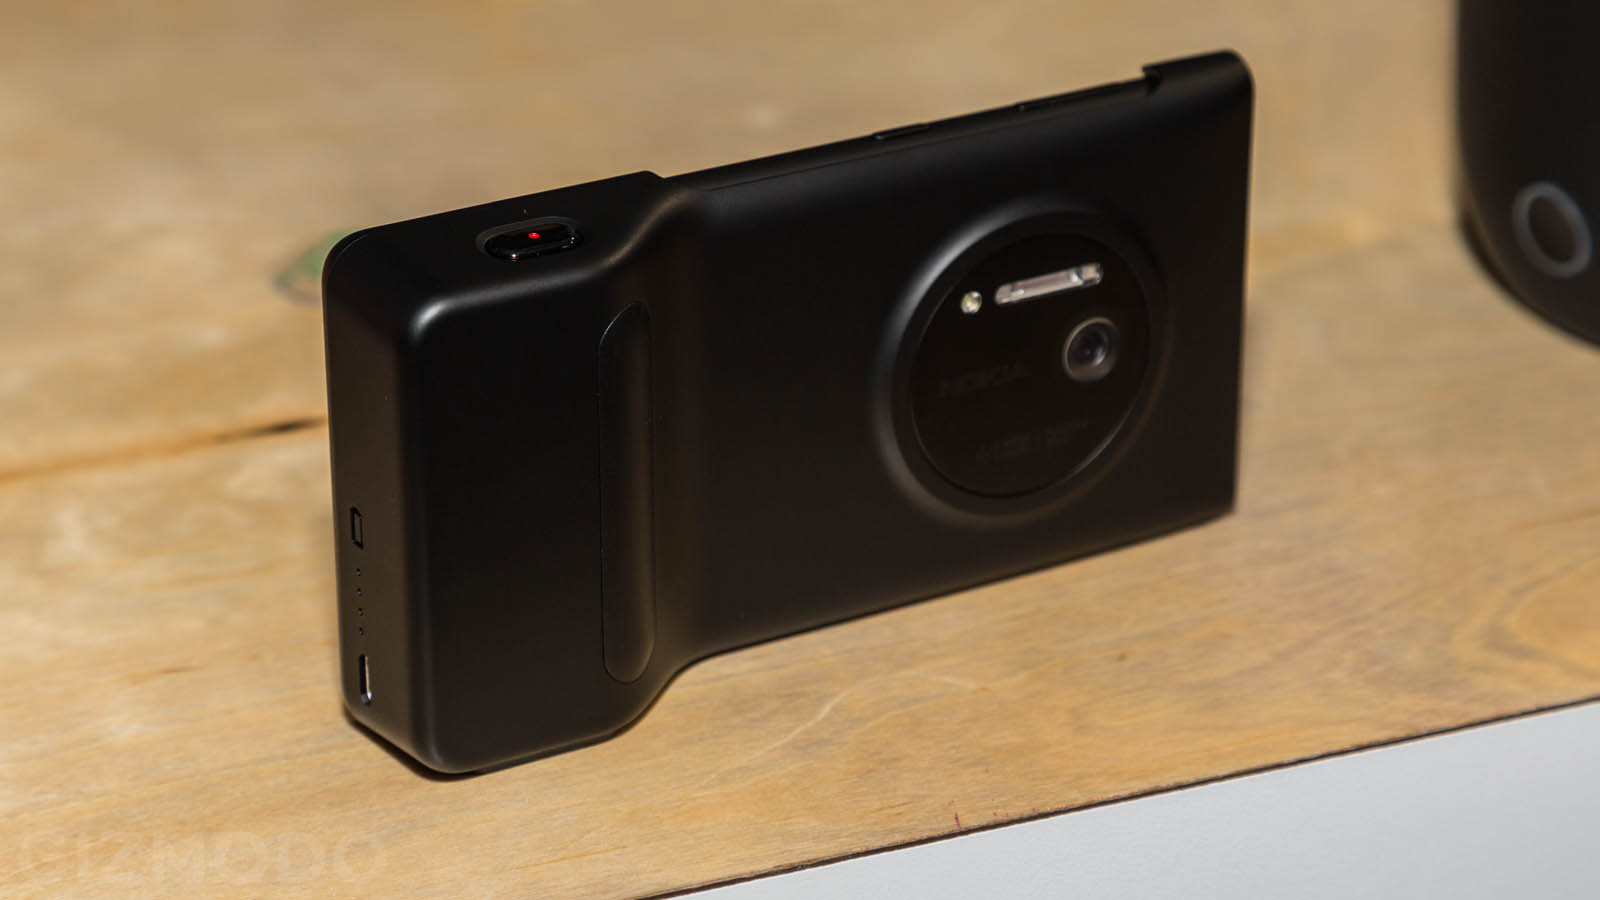 Nokia Lumia 1020 Hands-On: This Actually Might Be Amazing